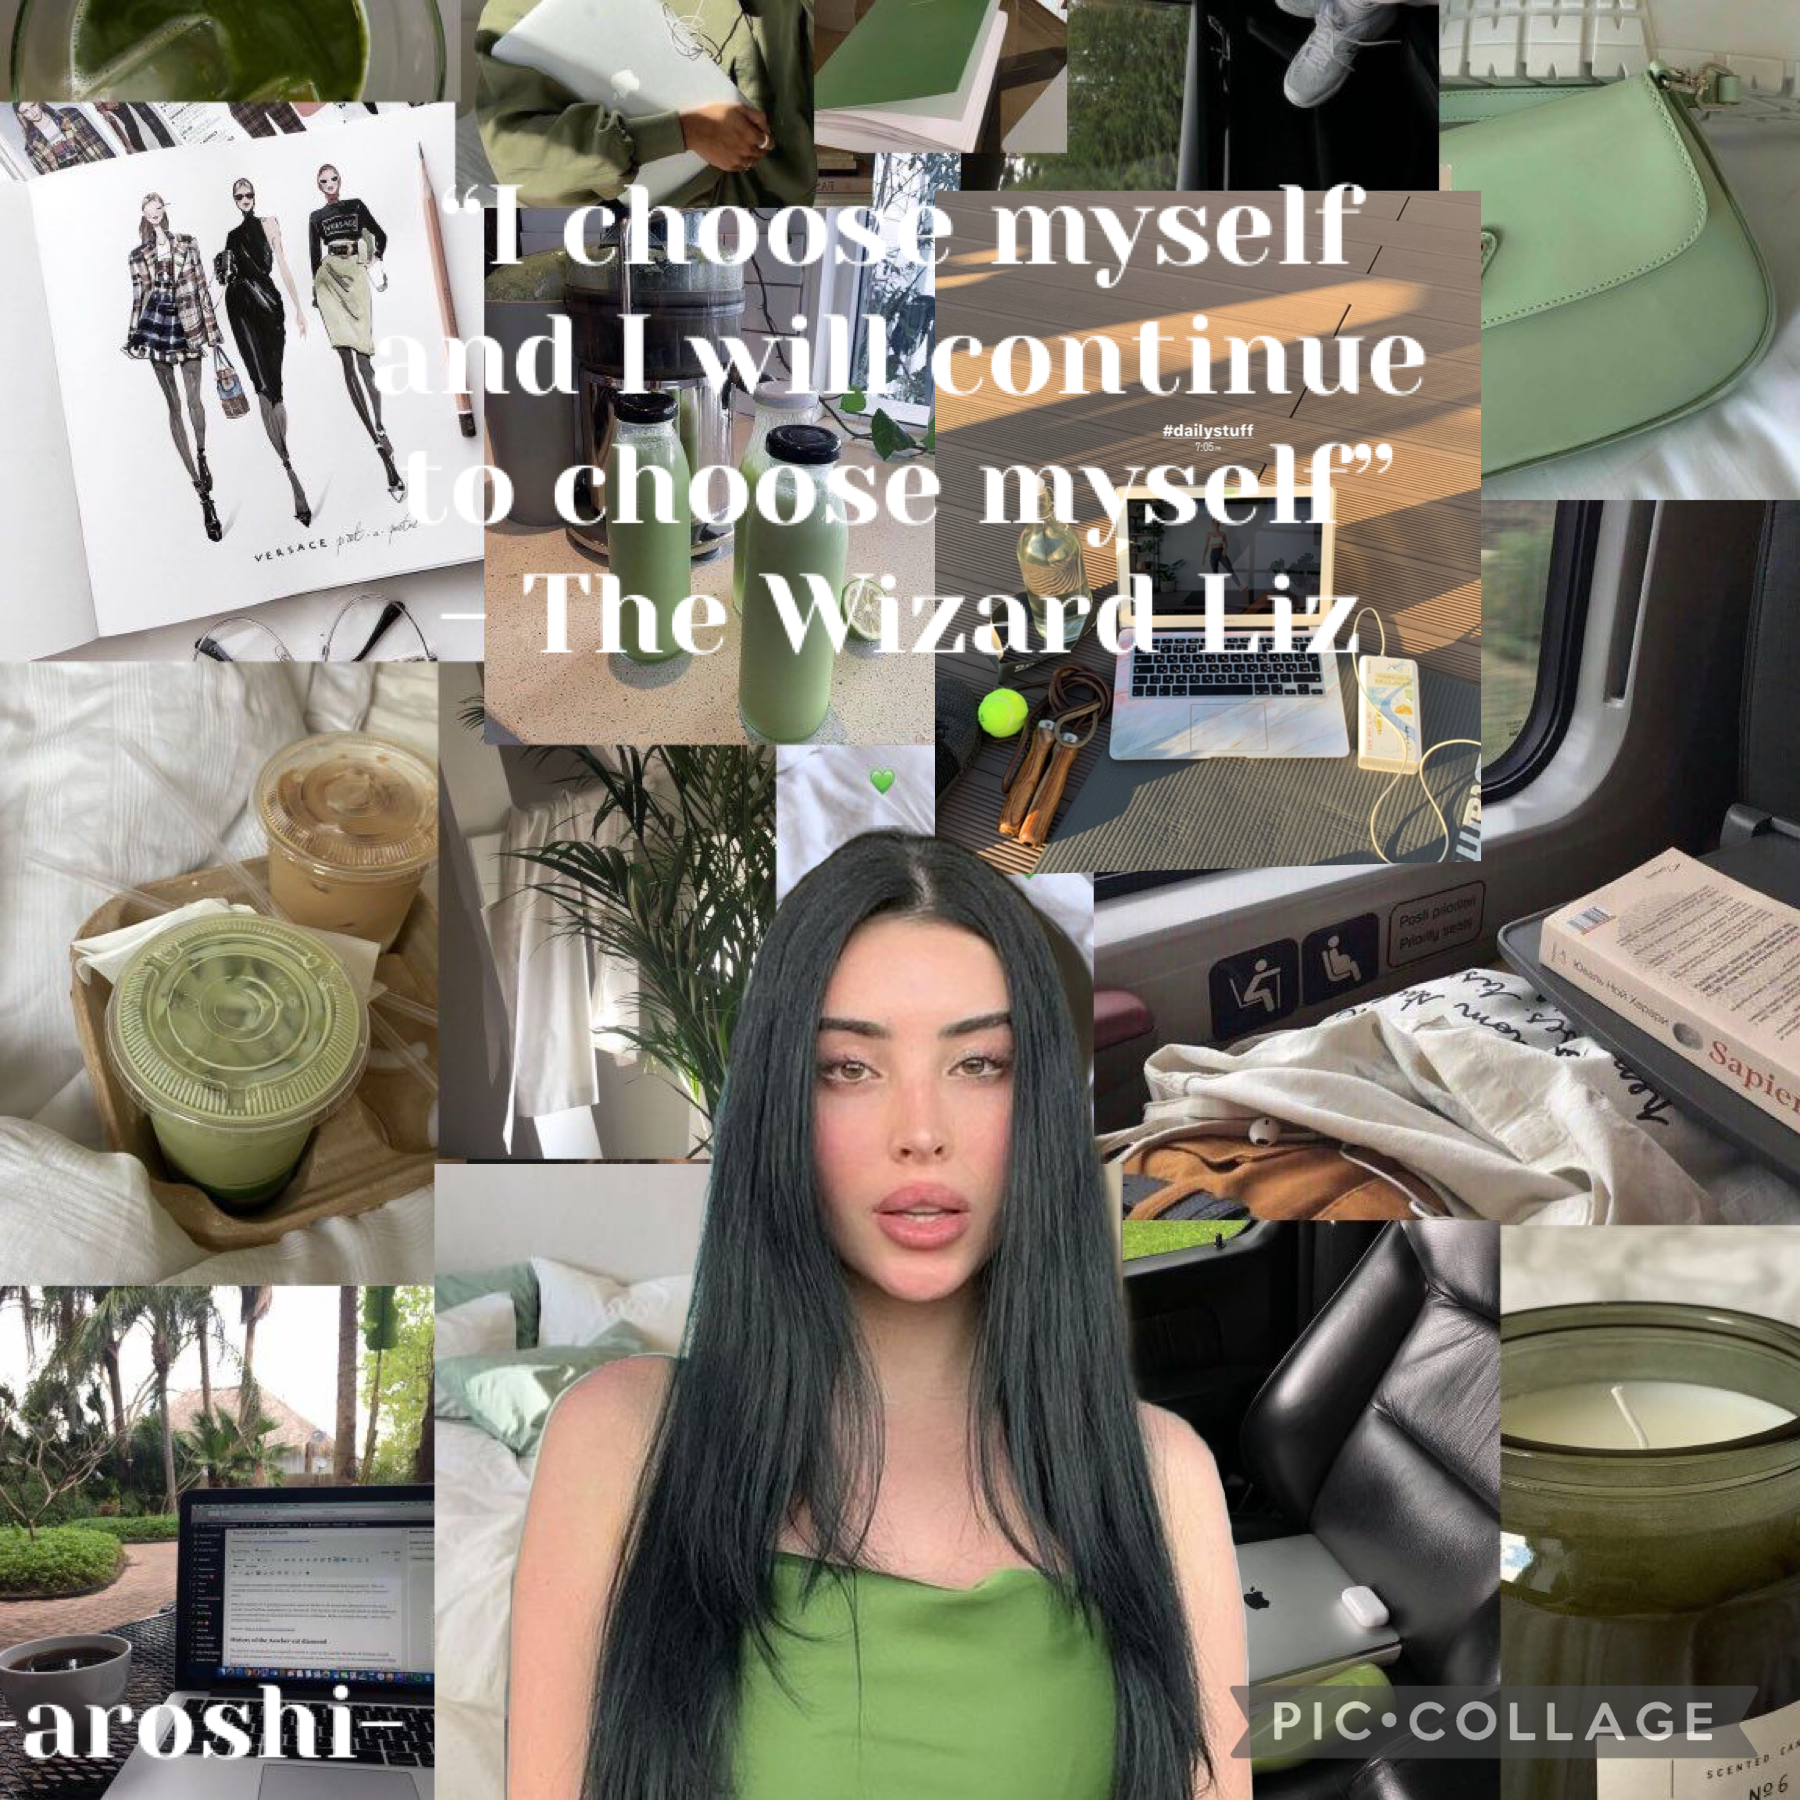 💶 Oct 1 23 💶
I had to dedicate this collage to my favourite YouTube and therapist THE WIZARD LIZ. make sure to watch her! Iykyk.. 